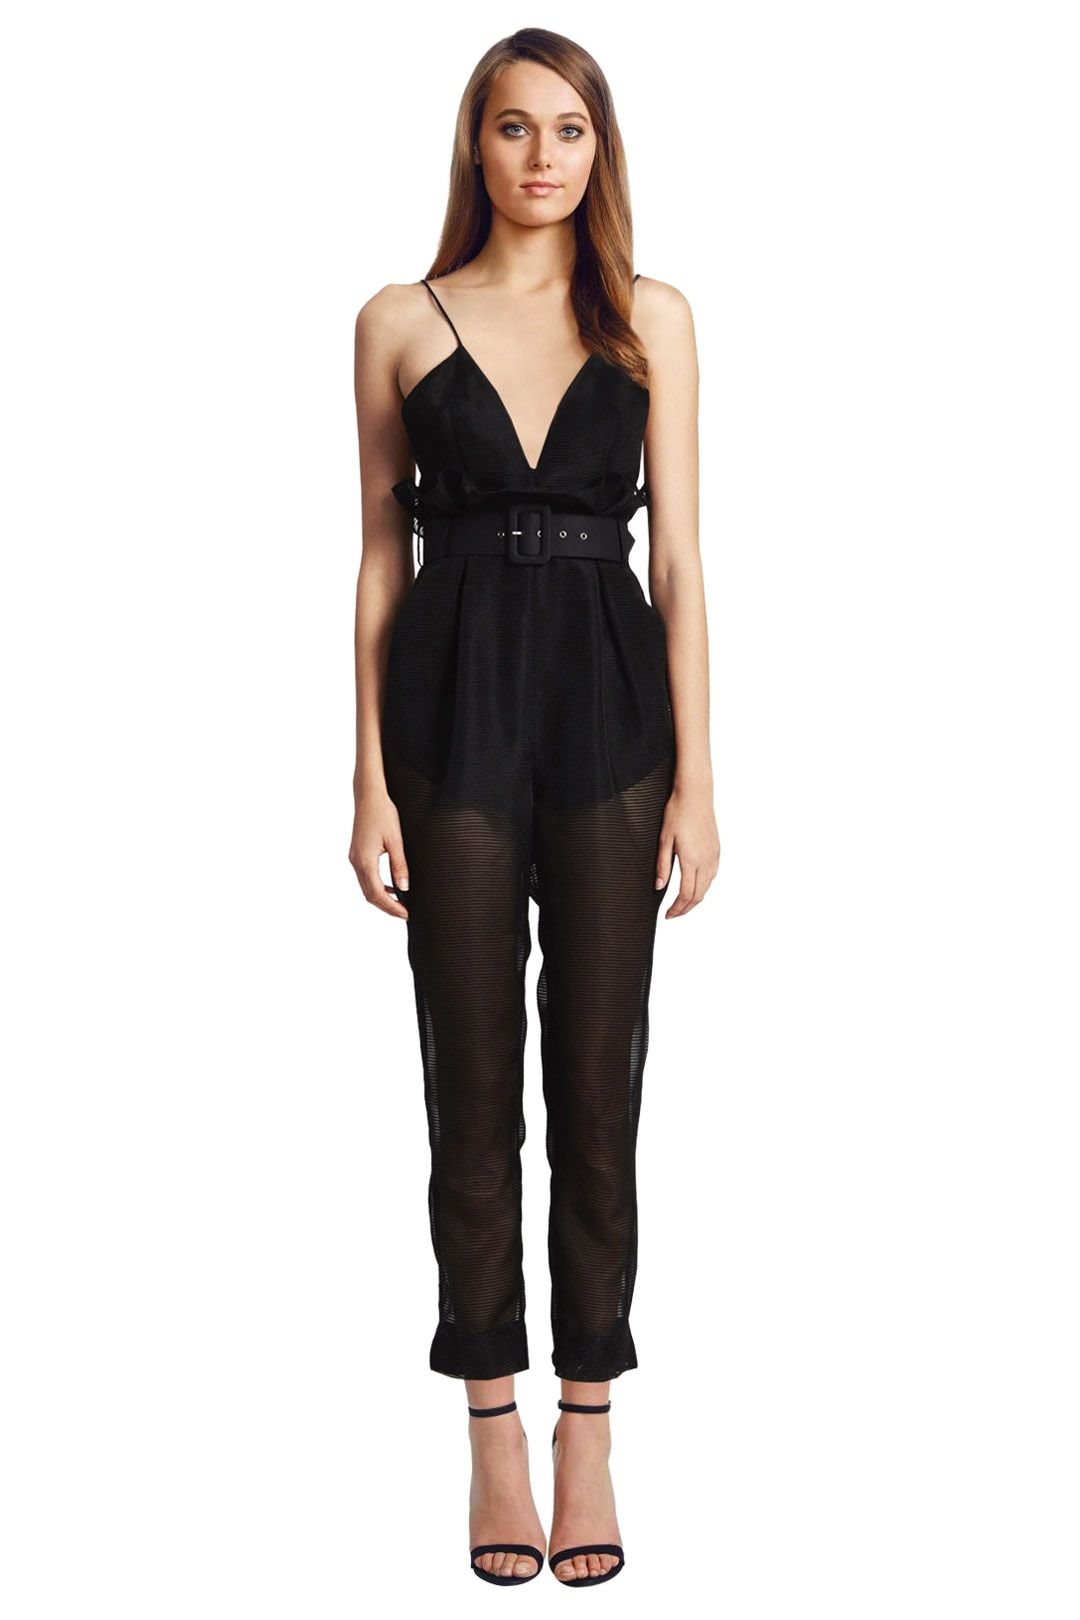 Alice McCall - Justify My Love Jumpsuit - Black - Front